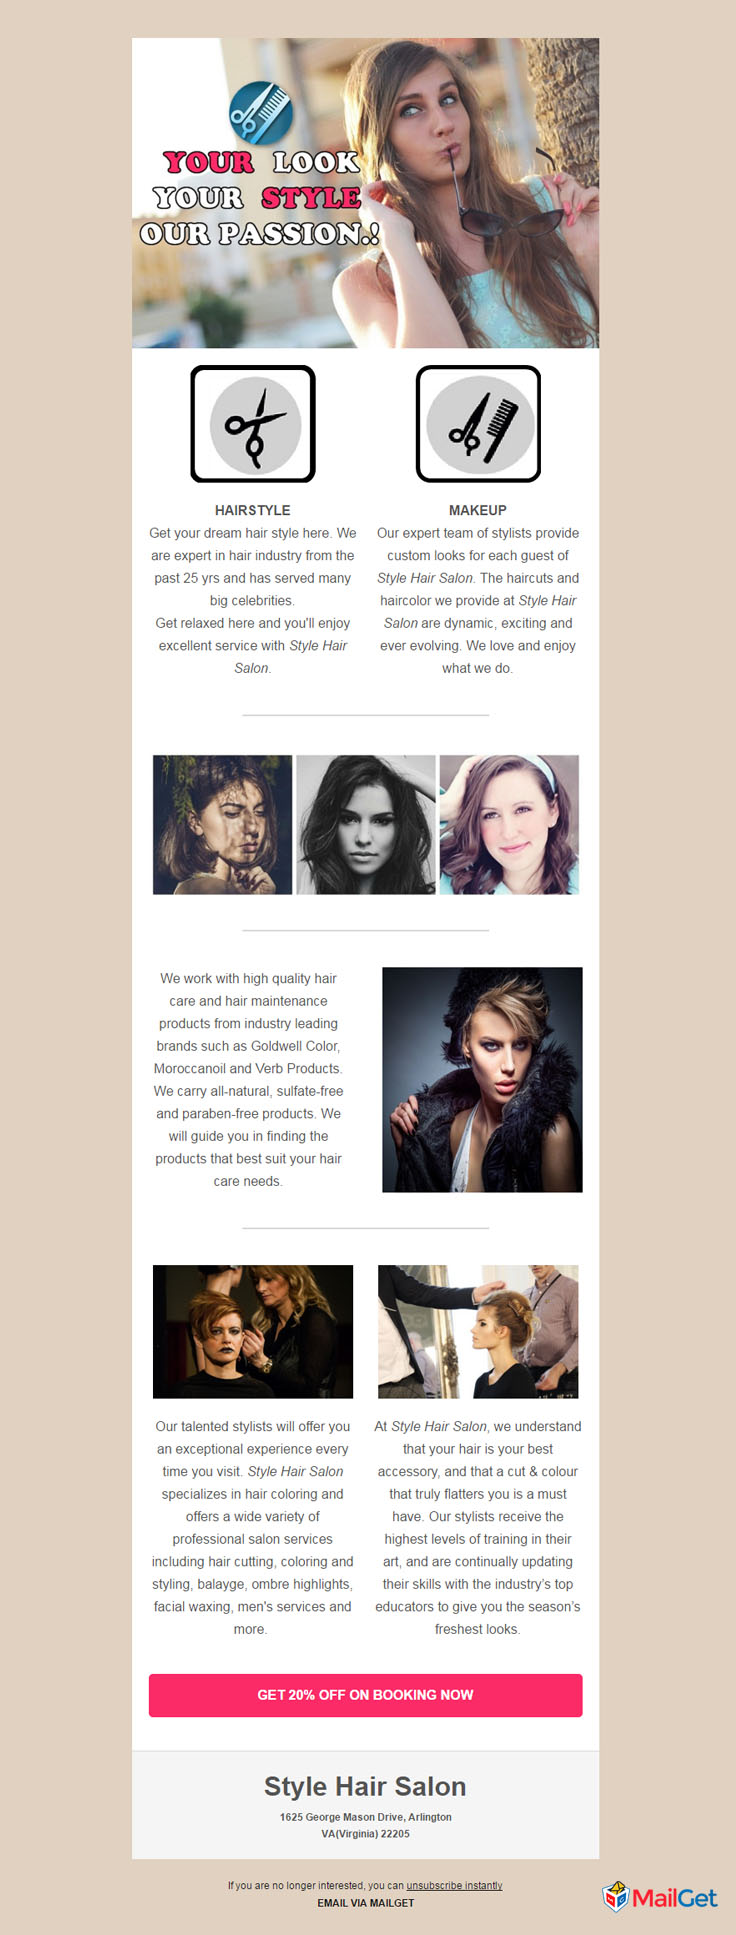 free-hair-salon-email-newsletter-templates-2-MailGet